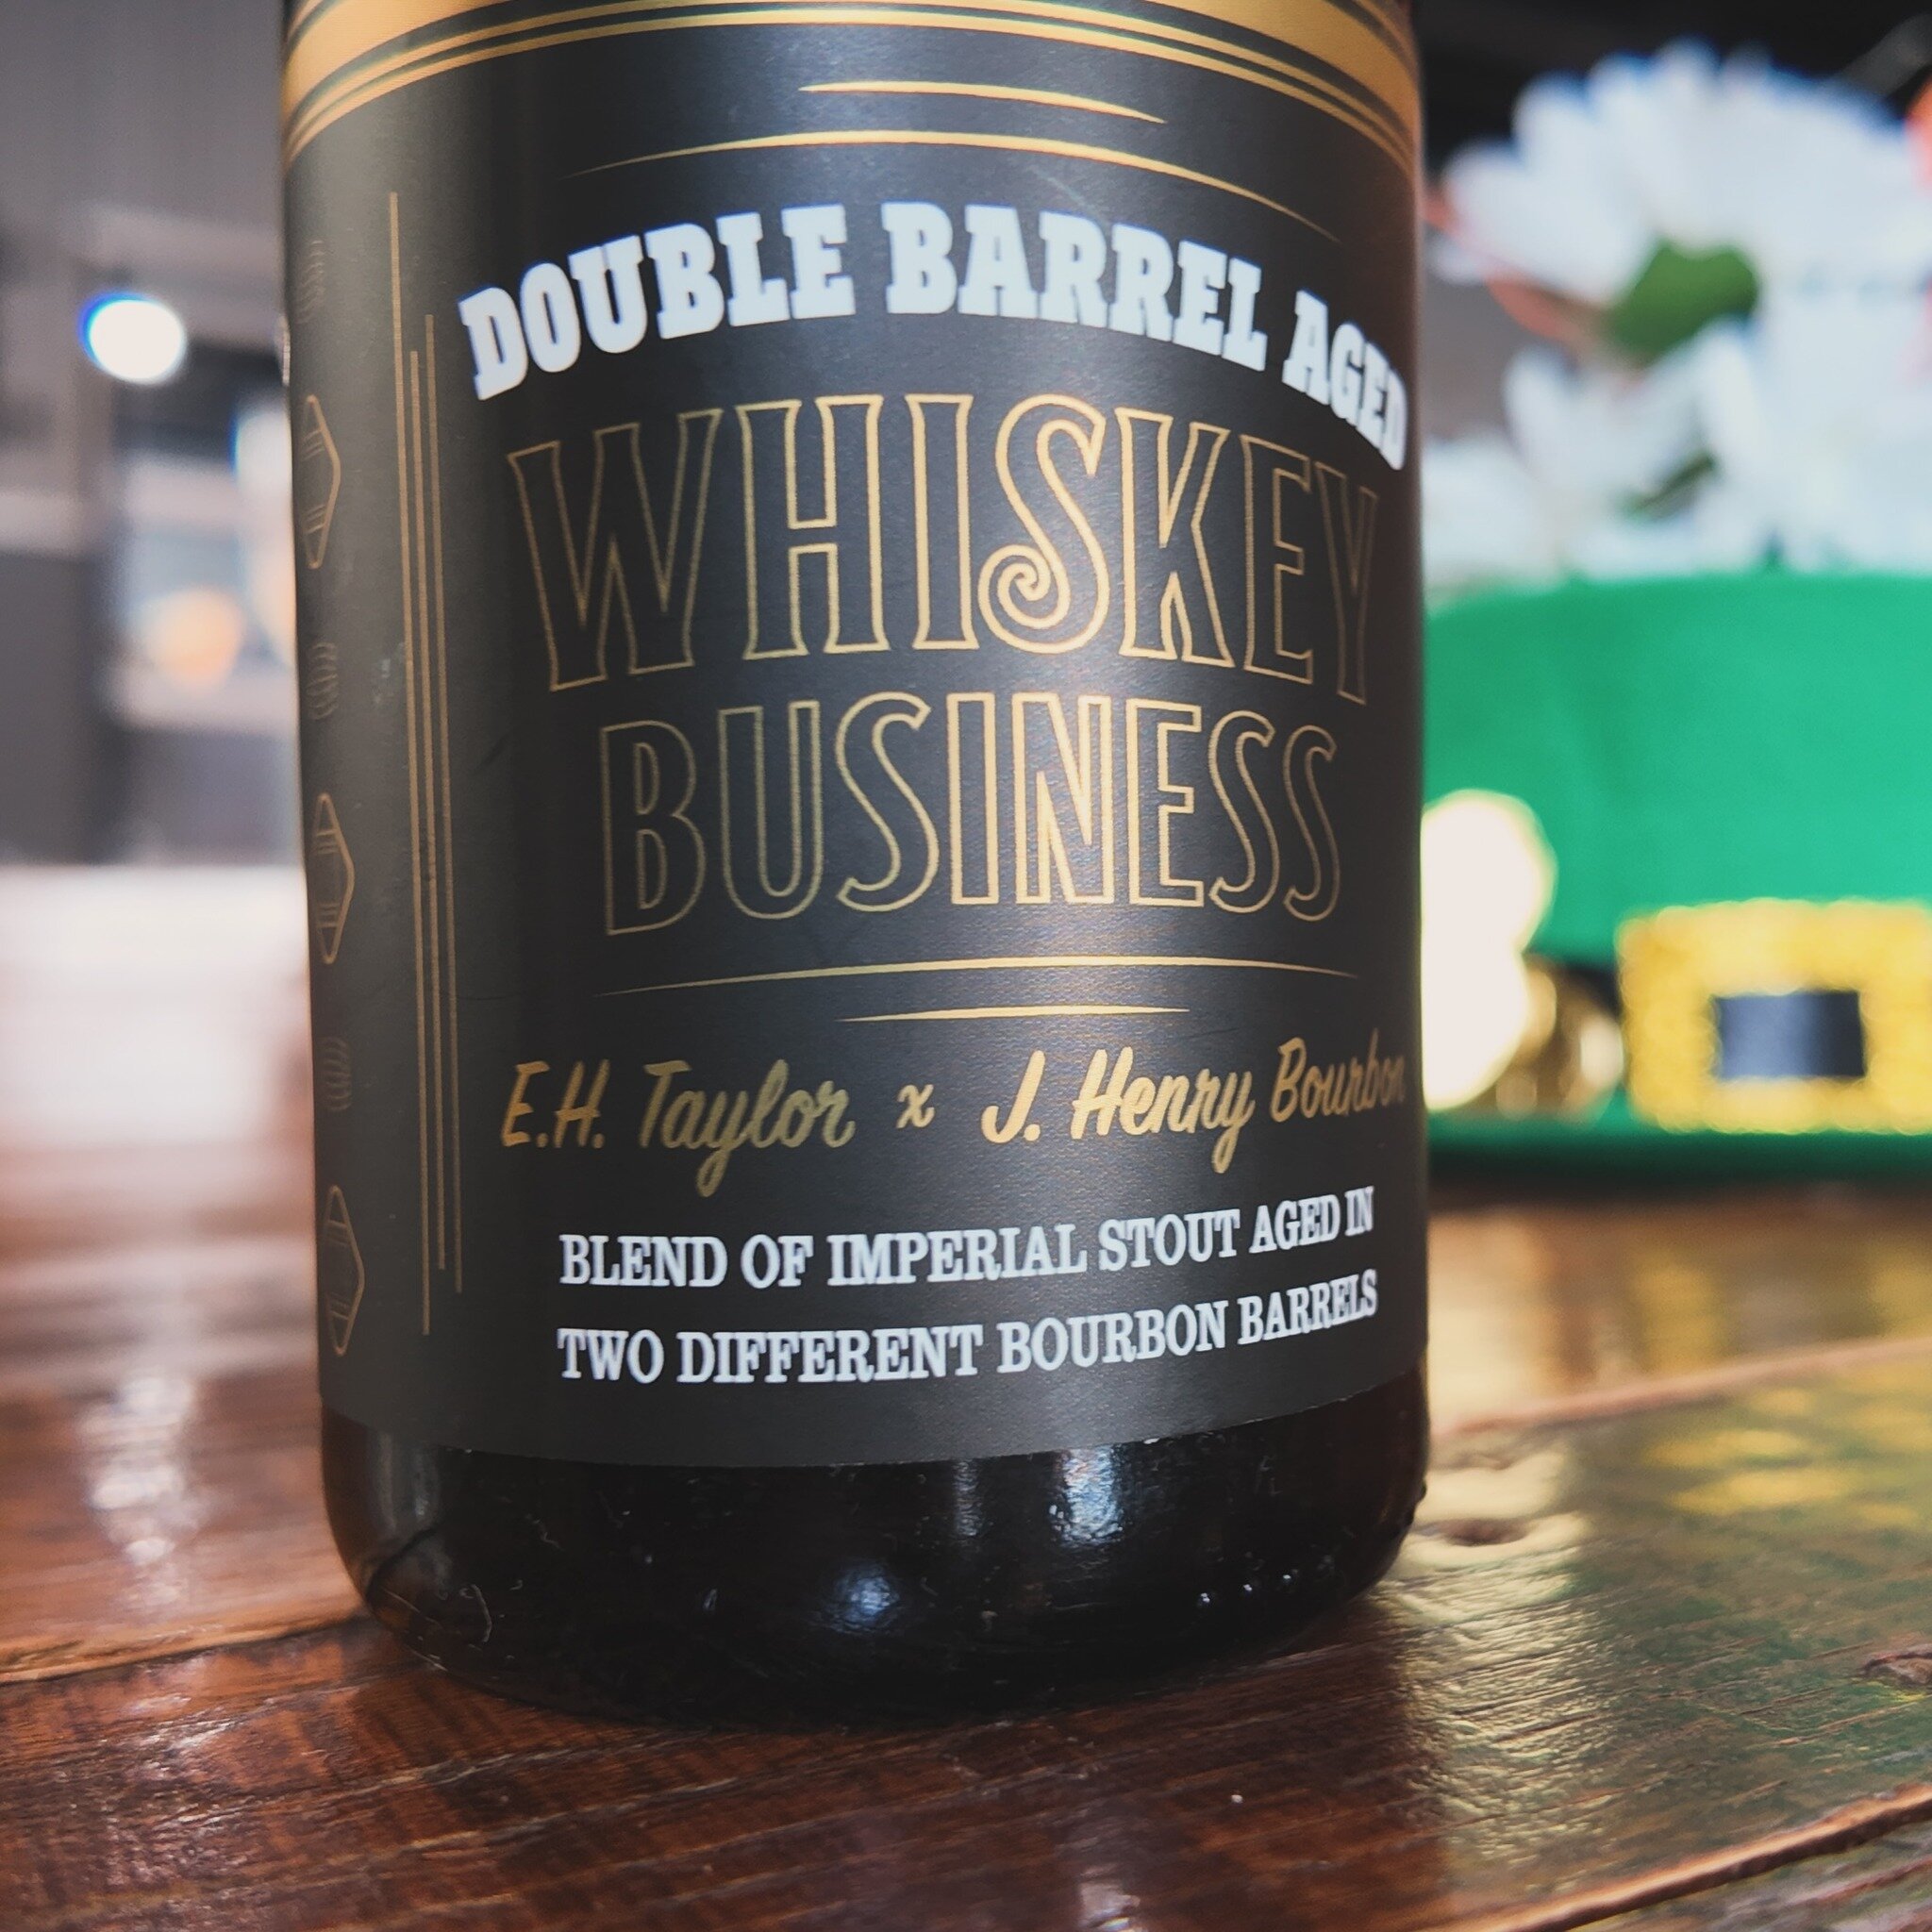 This Friday 3/15, 12pm, new St. Paddy&rsquo;s tradition begins. Double Barrel Whiskey Business.

This one is double the barrels, double the fun. About a half year in J. Henry casks, then rested to completion in spent E.H. Taylor bourbon barrels. It&r